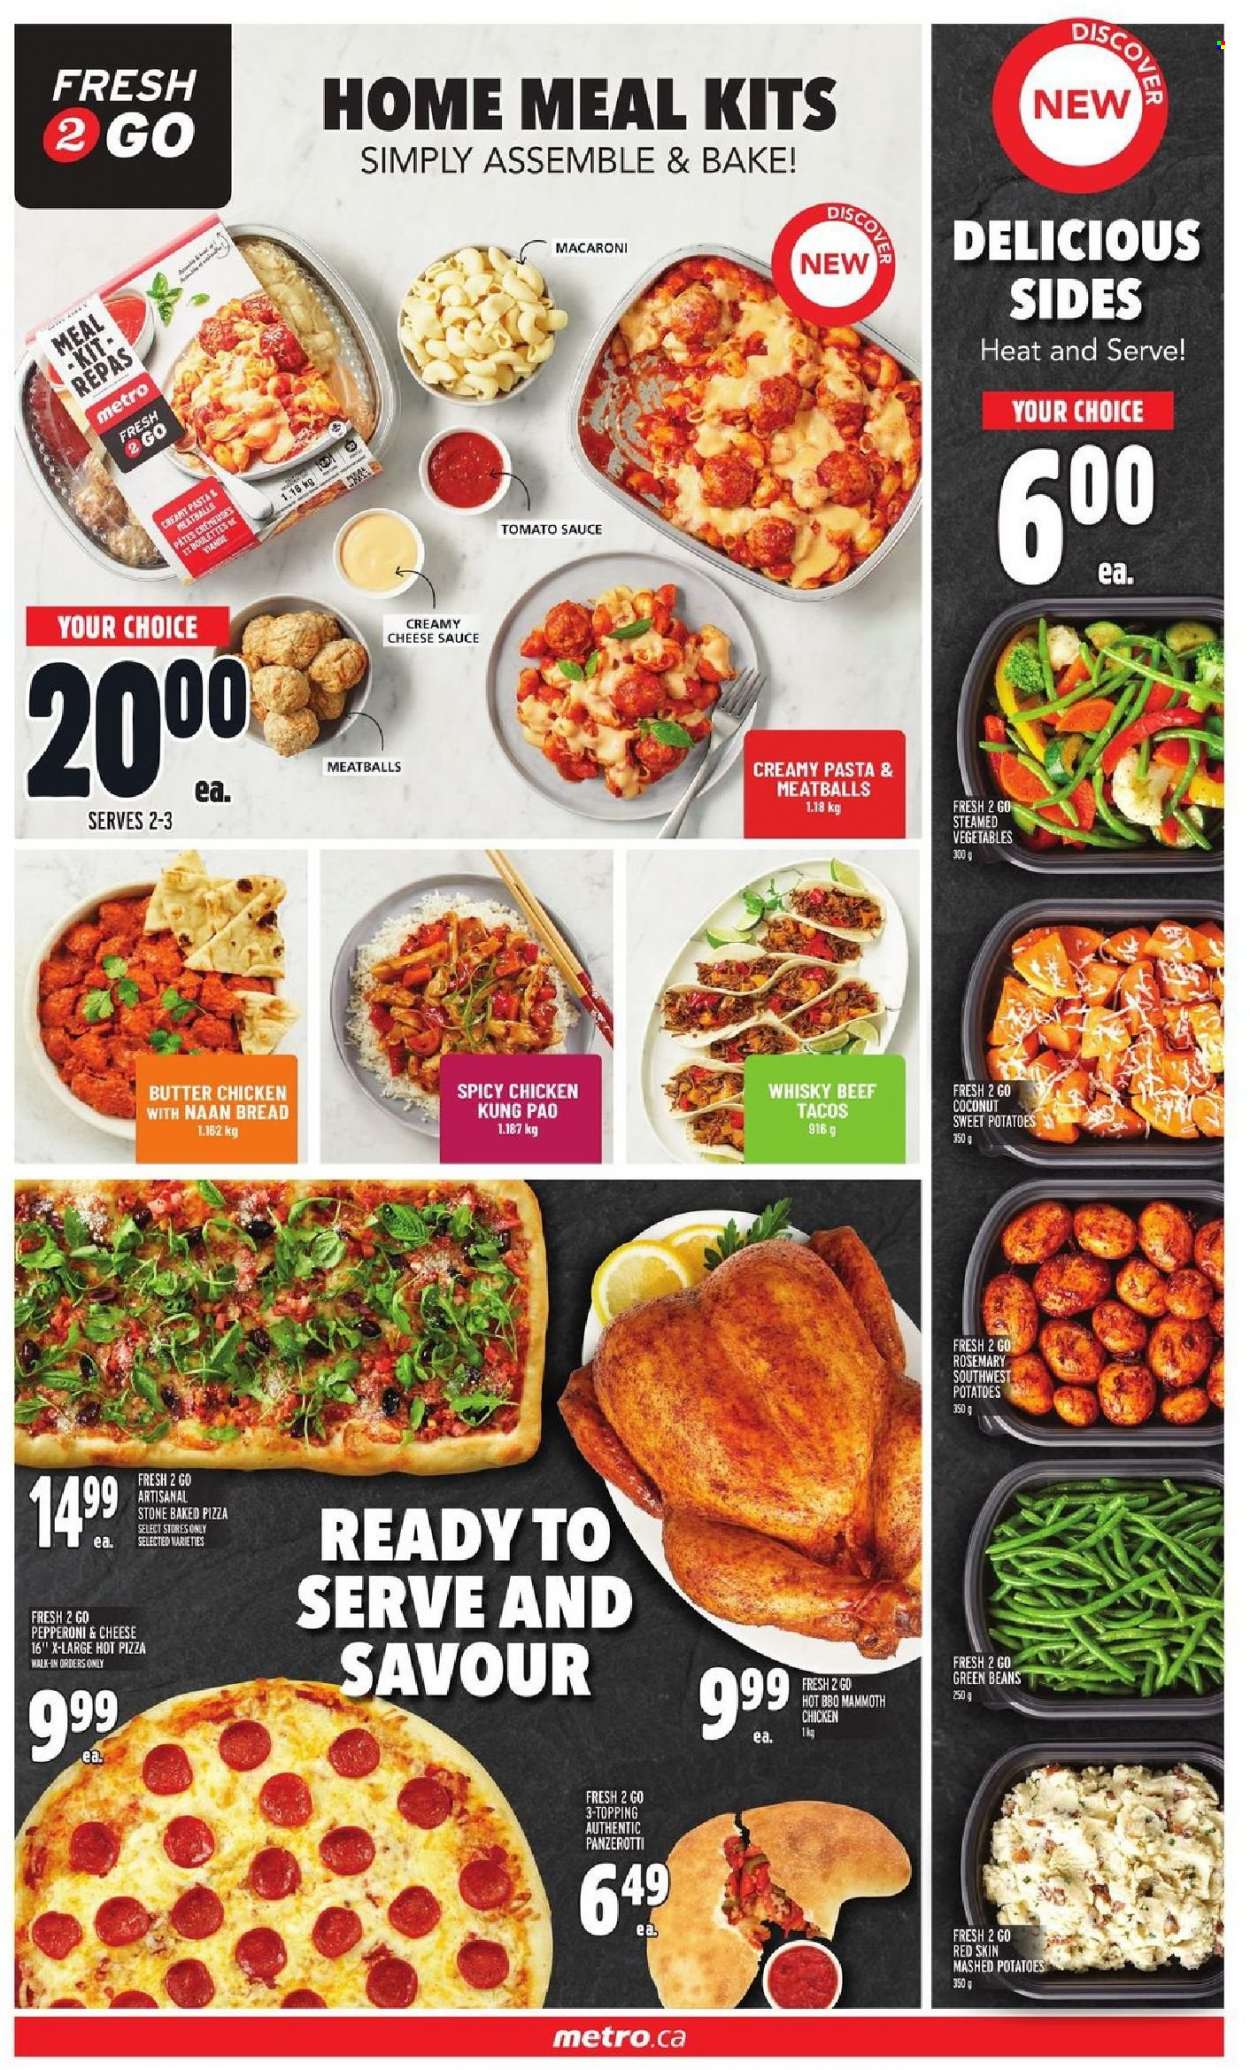 thumbnail - Metro Flyer - October 14, 2021 - October 20, 2021 - Sales products - bread, tacos, green beans, sweet potato, coconut, mashed potatoes, meatballs, macaroni, sauce, topping, tomato sauce, rosemary, whisky. Page 6.